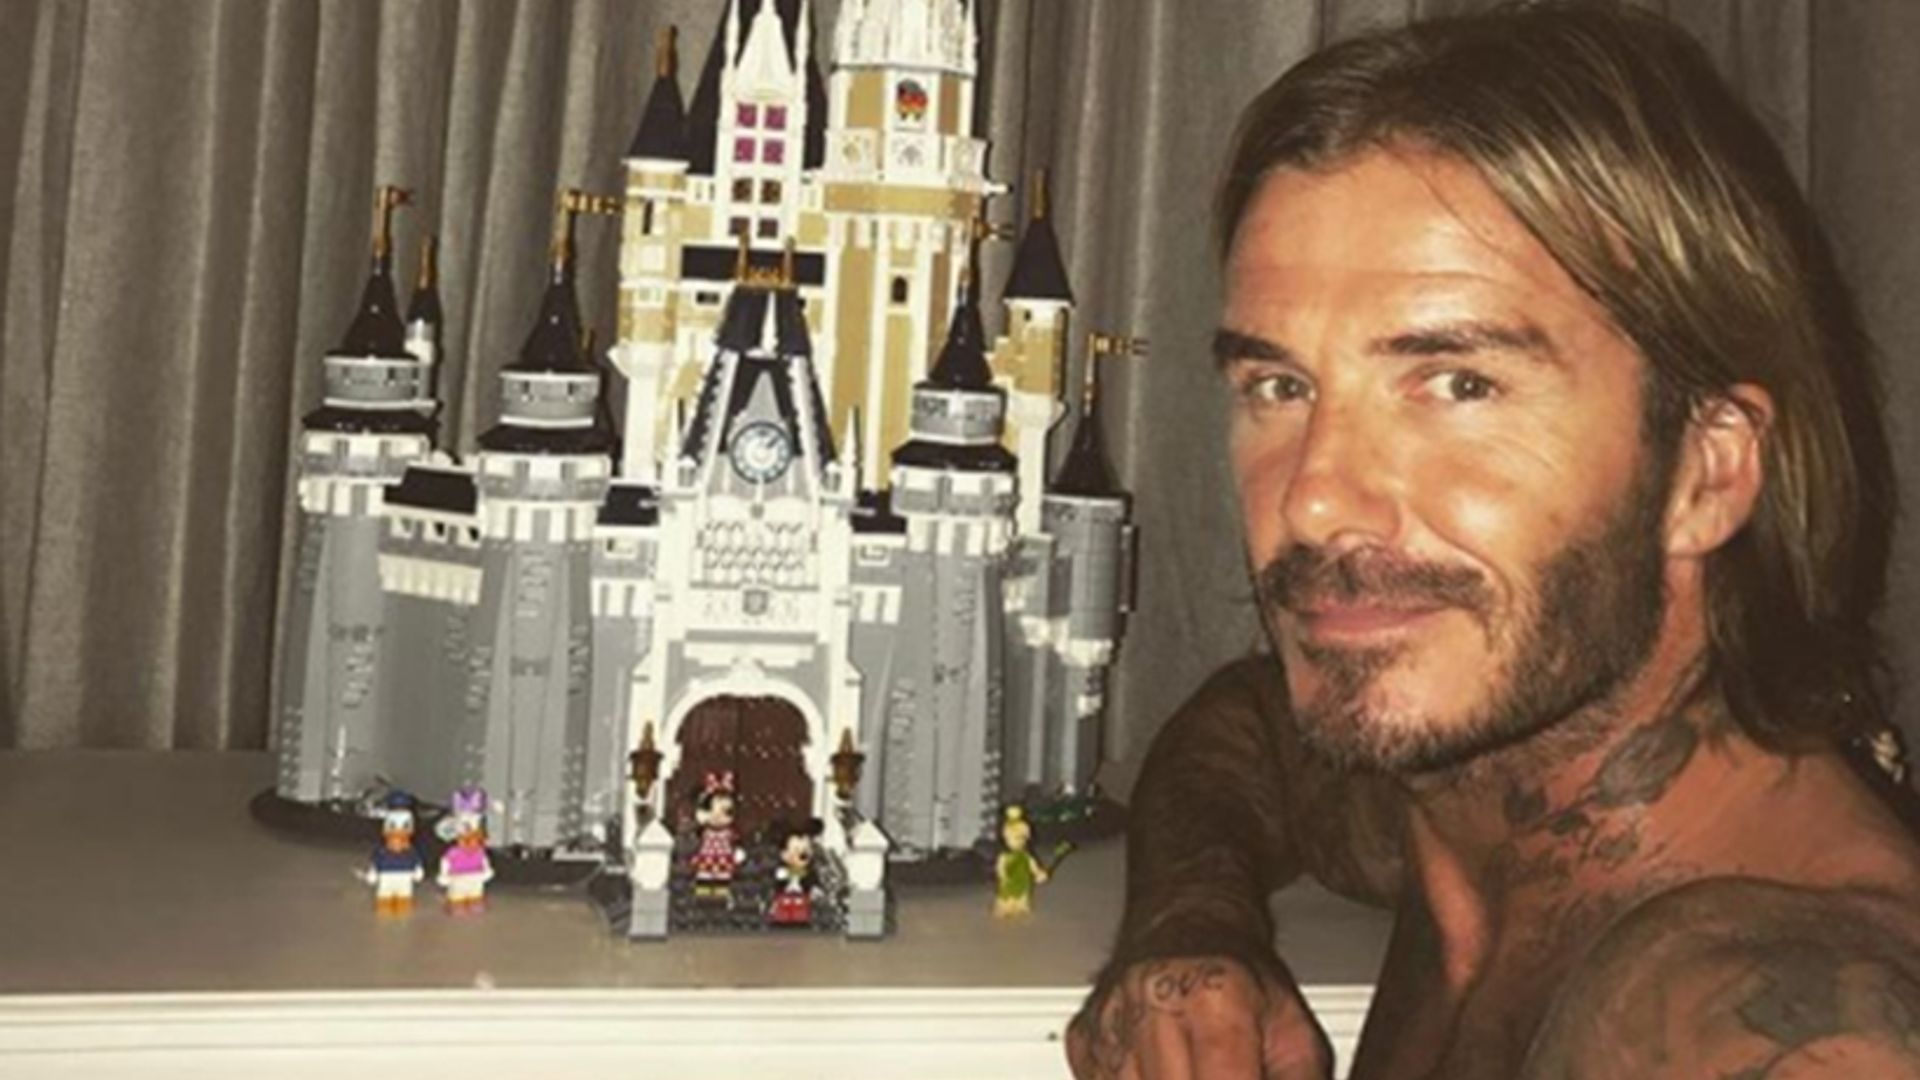 David Beckham has built a Disney castle for his daughter Harper – see the photo!